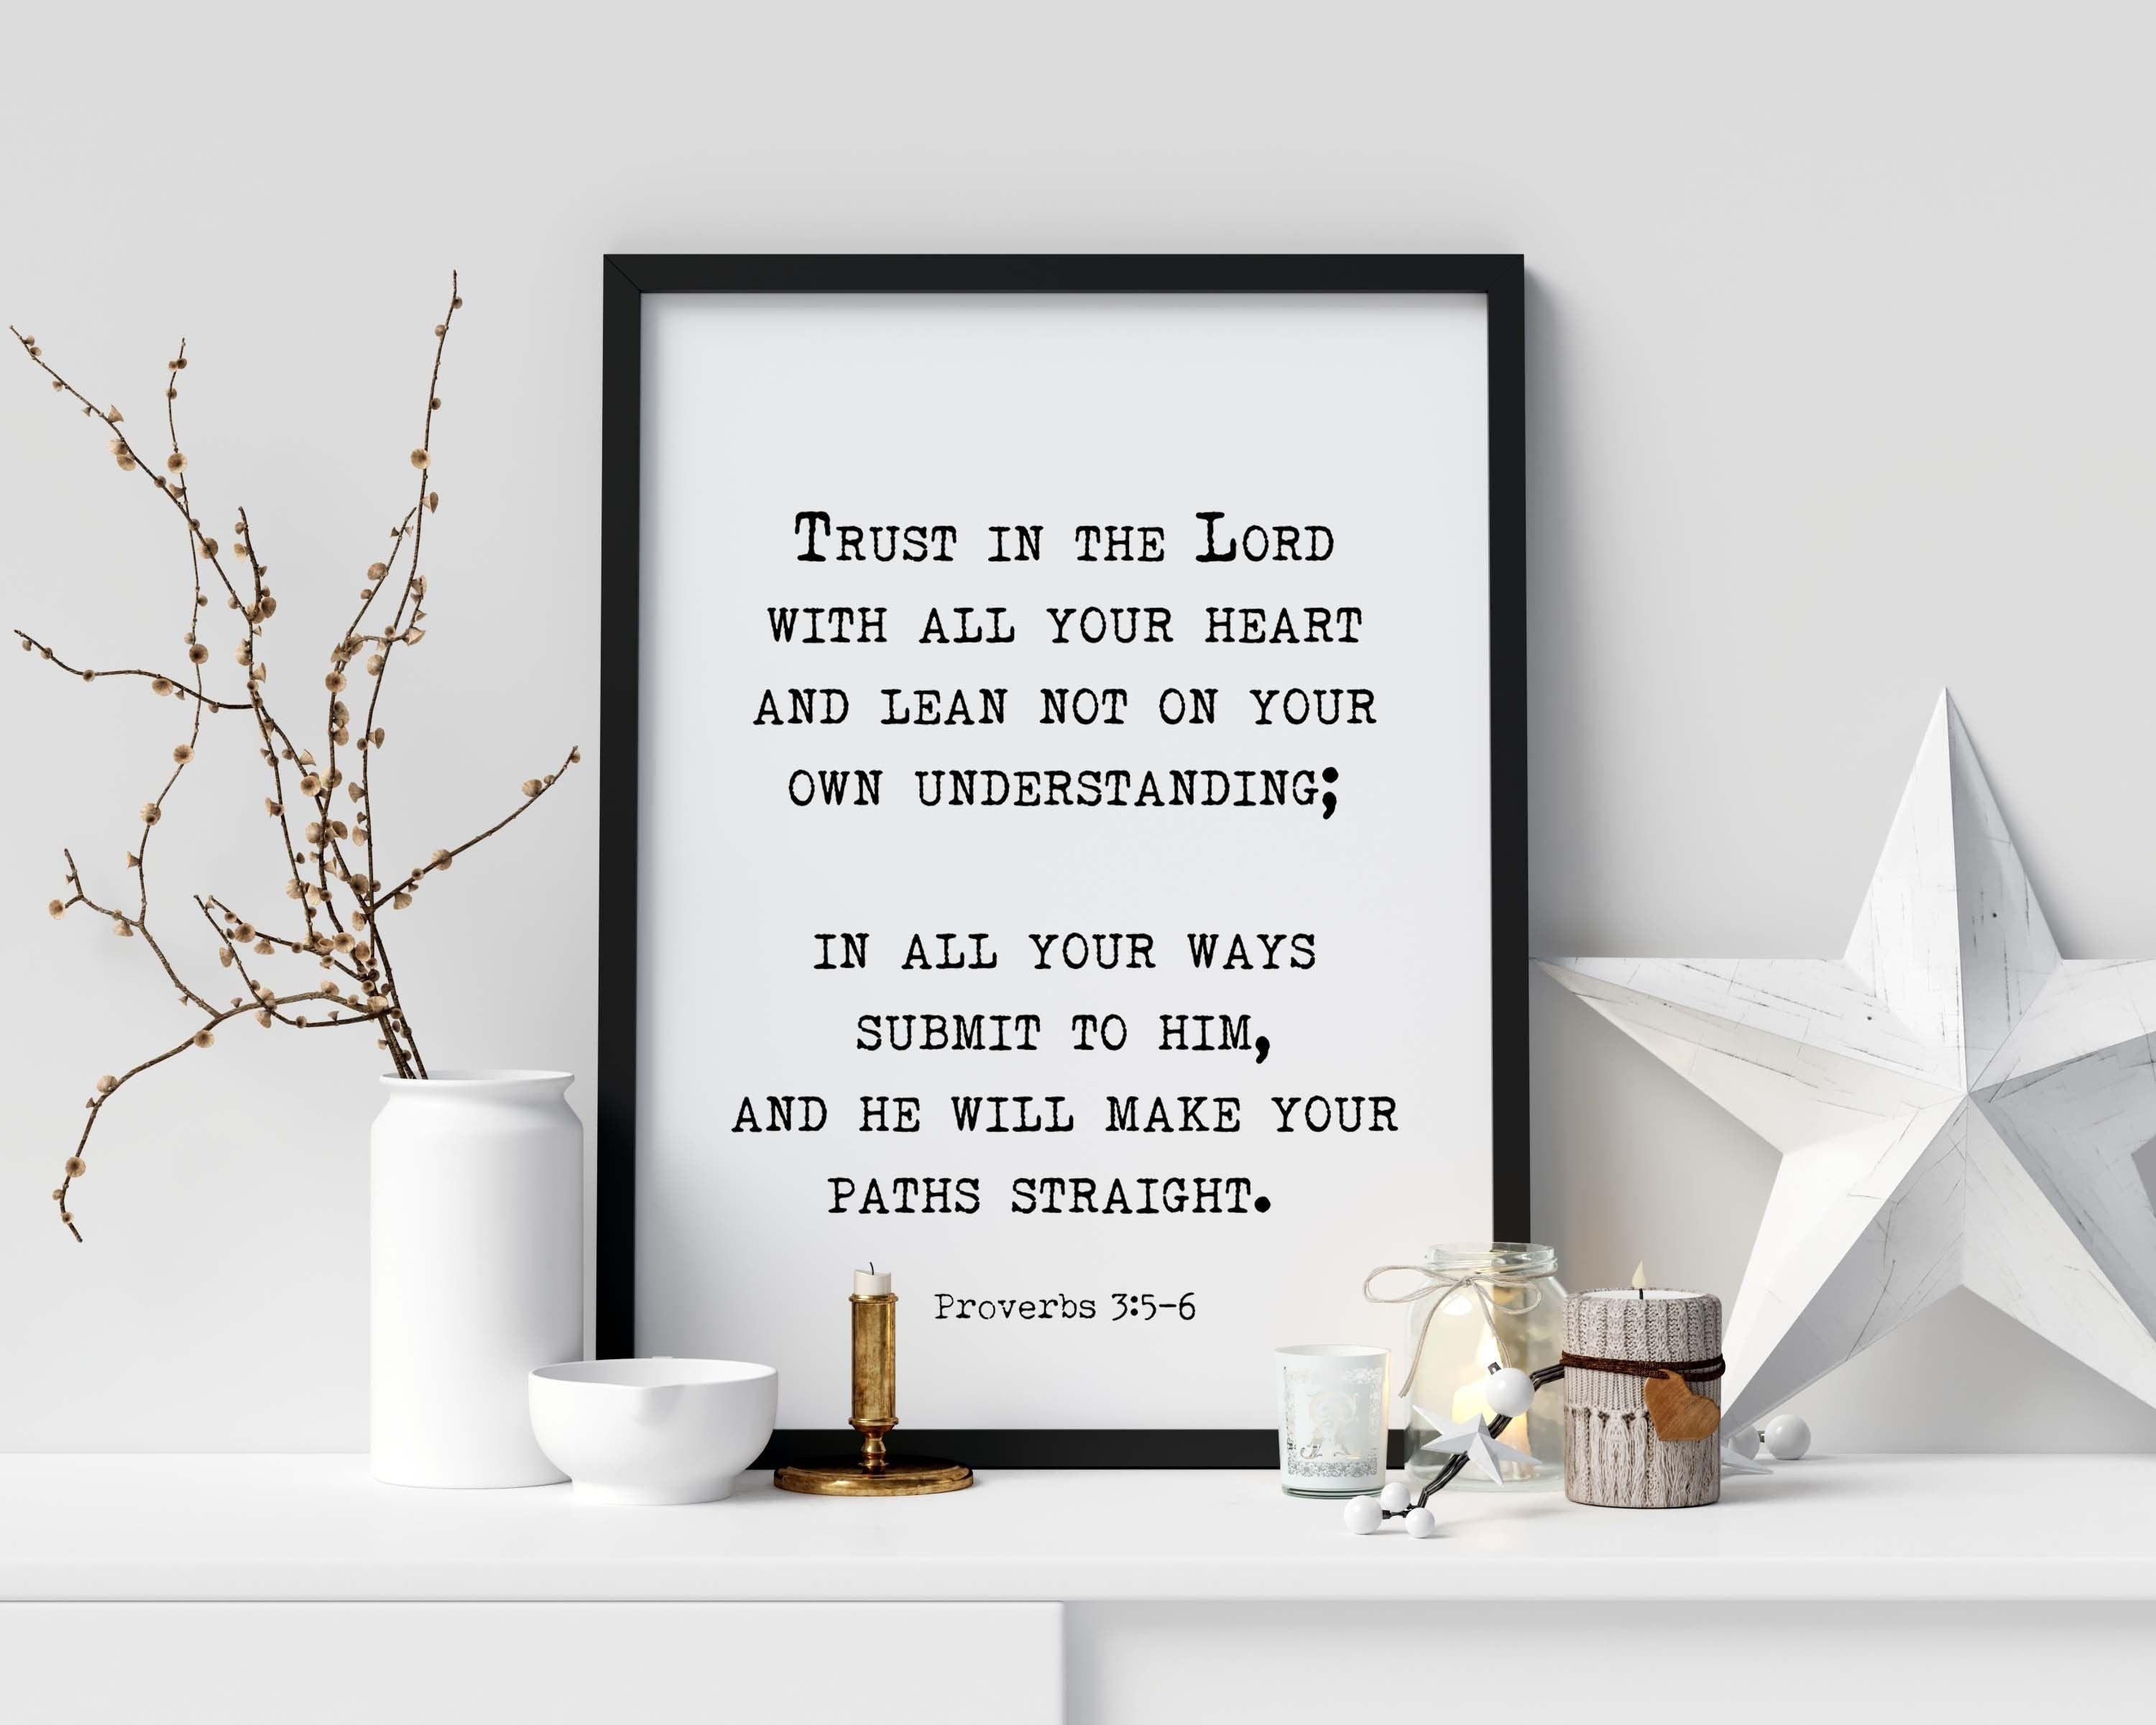 Trust in the LORD Proverbs 3:5-6 Bible Verse Print, Inspirational Gift Wall Art in Black & White